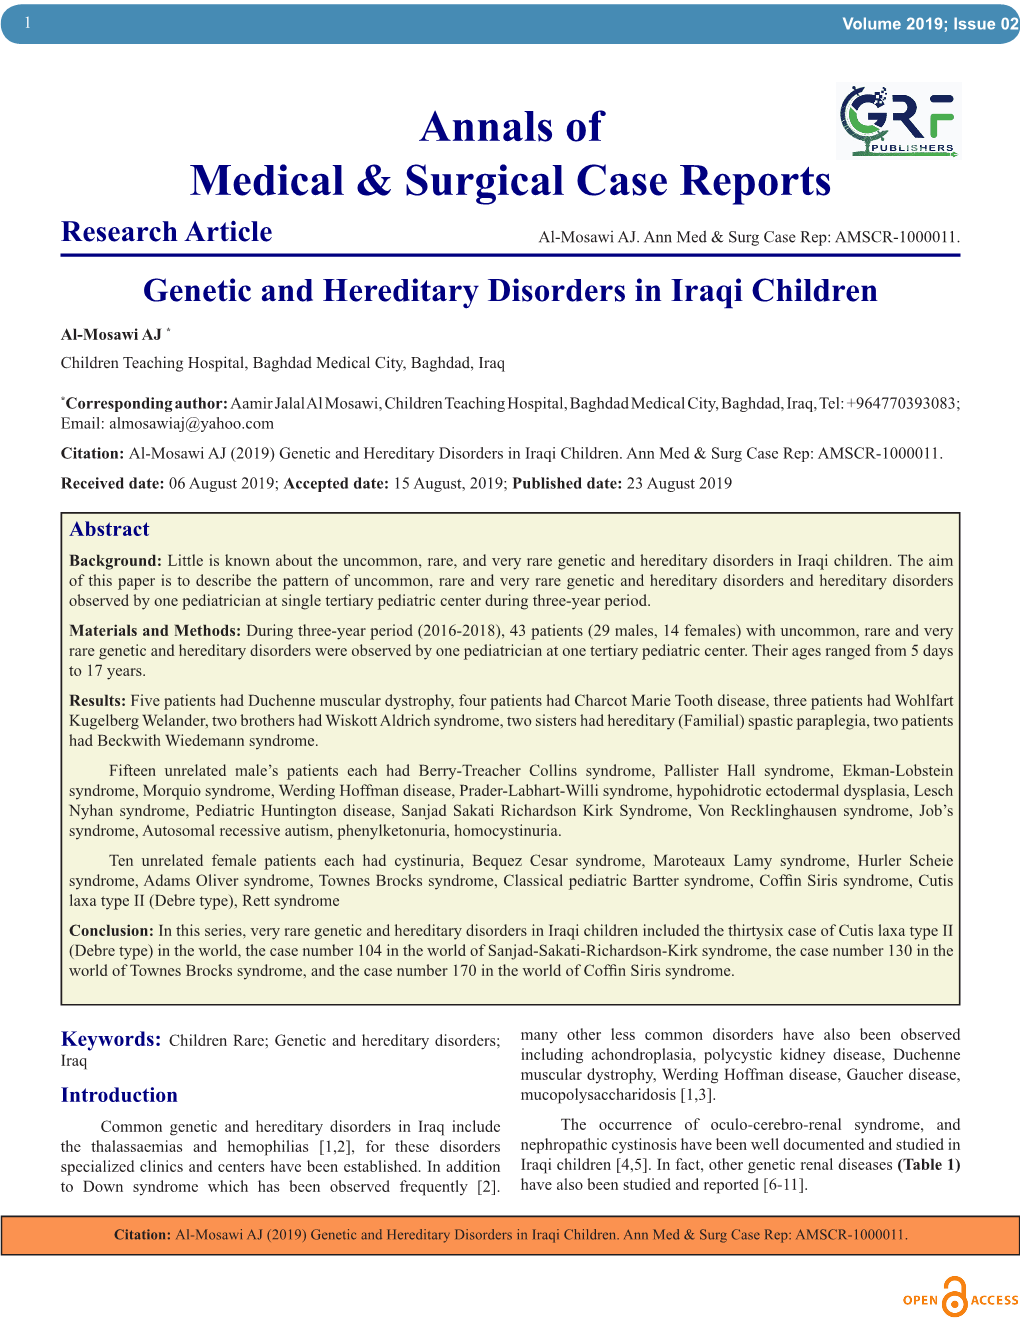 Annals of Medical & Surgical Case Reports